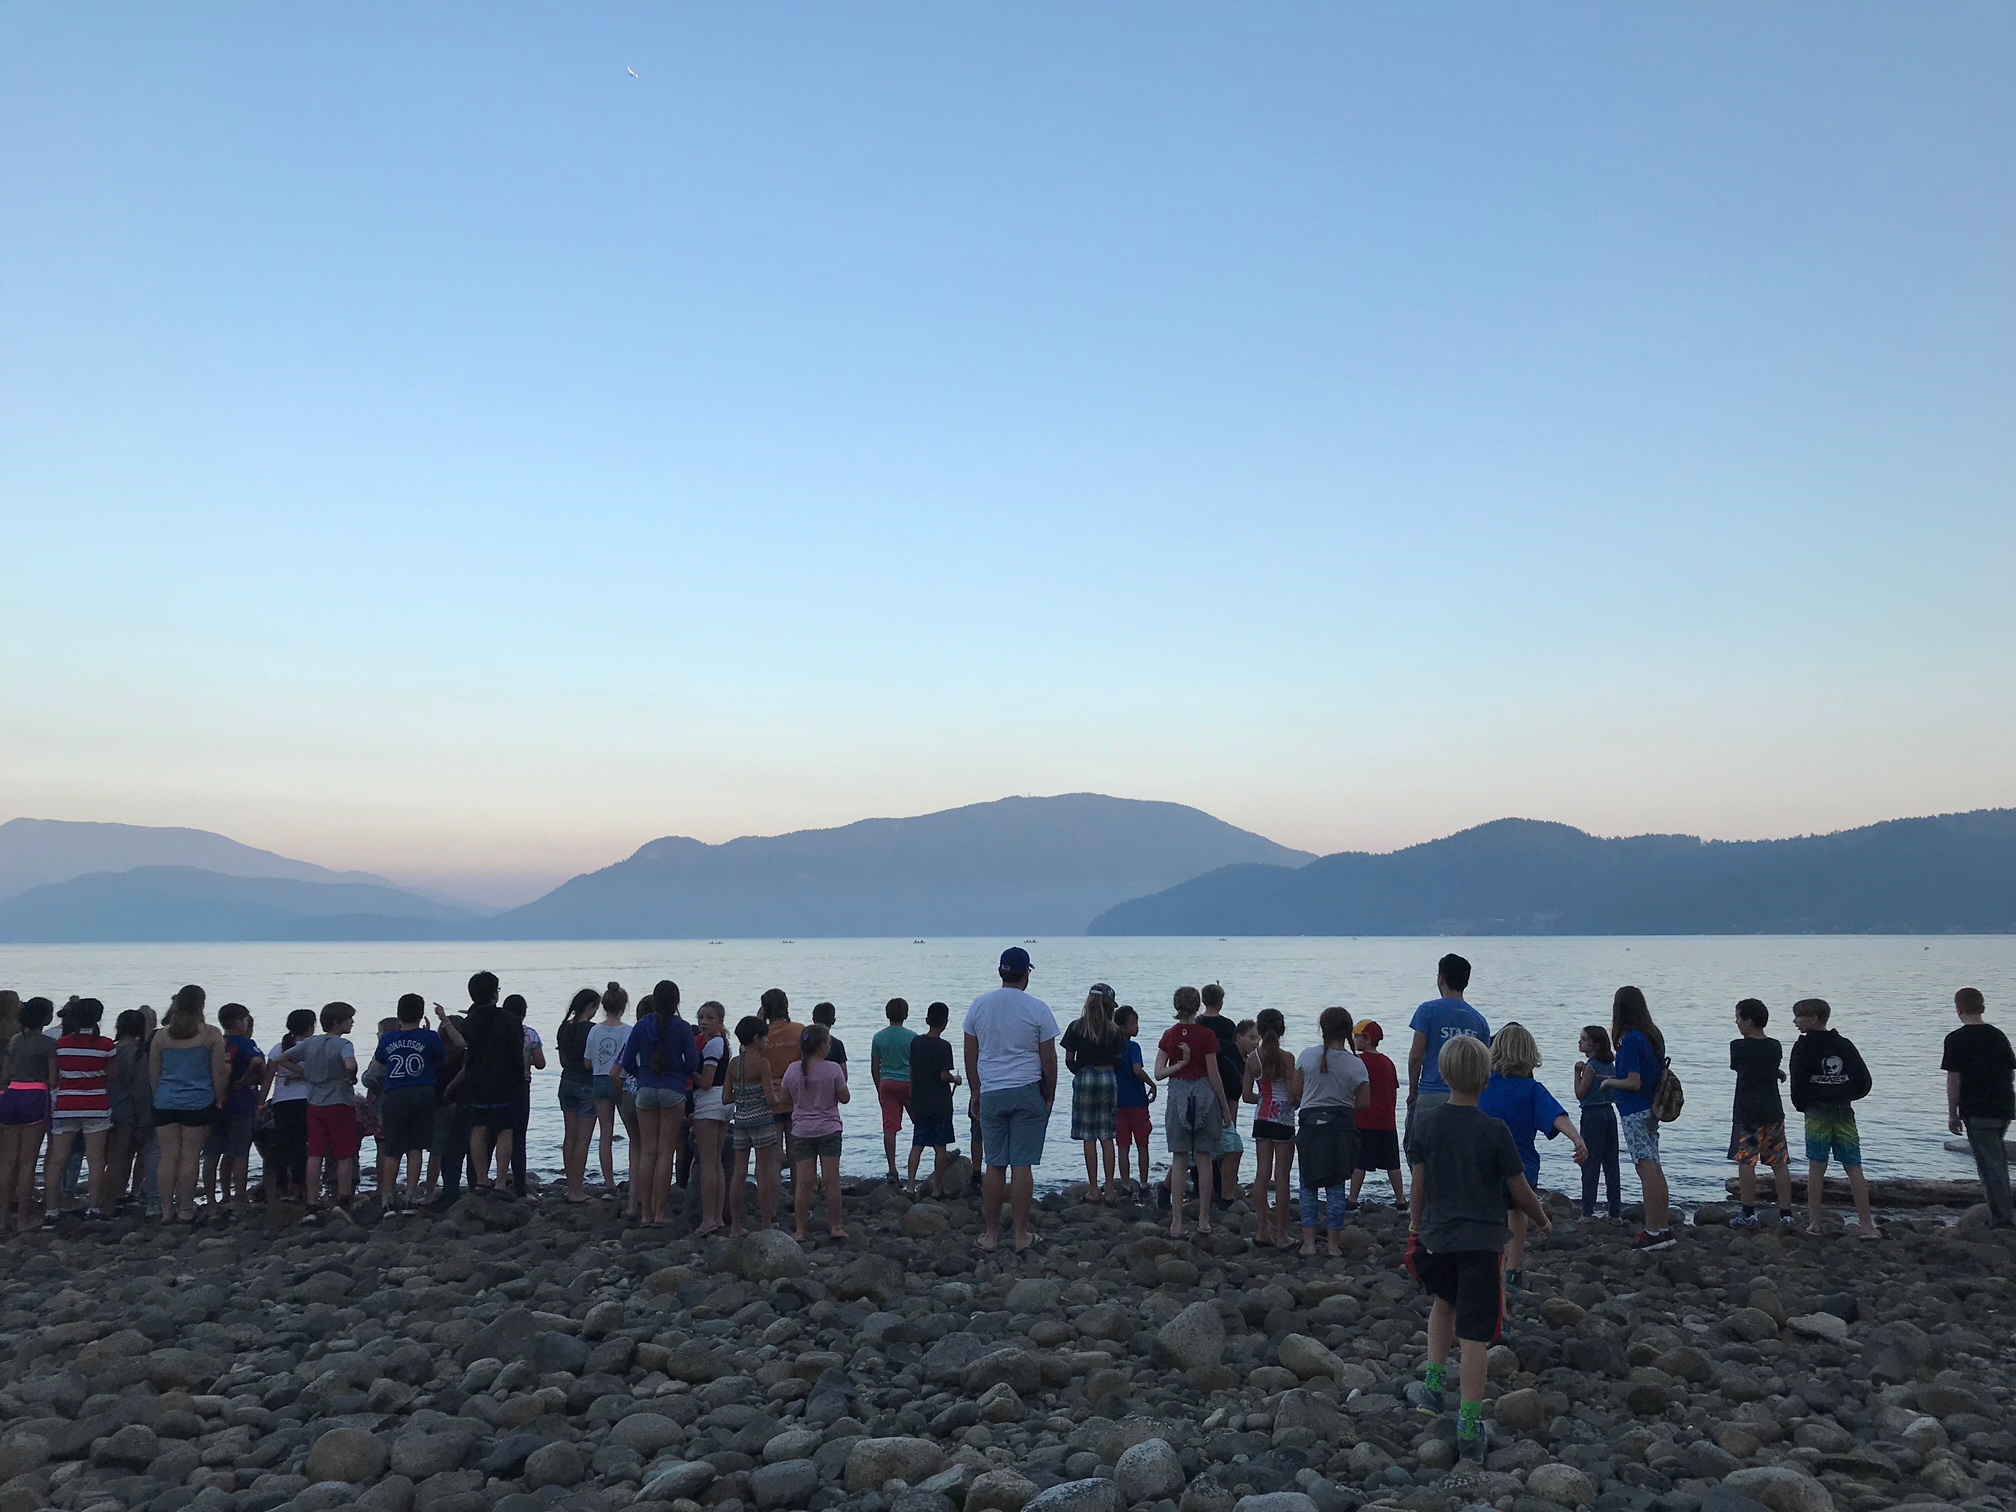 Large group of people on rocky beach looking at ocean and mountains